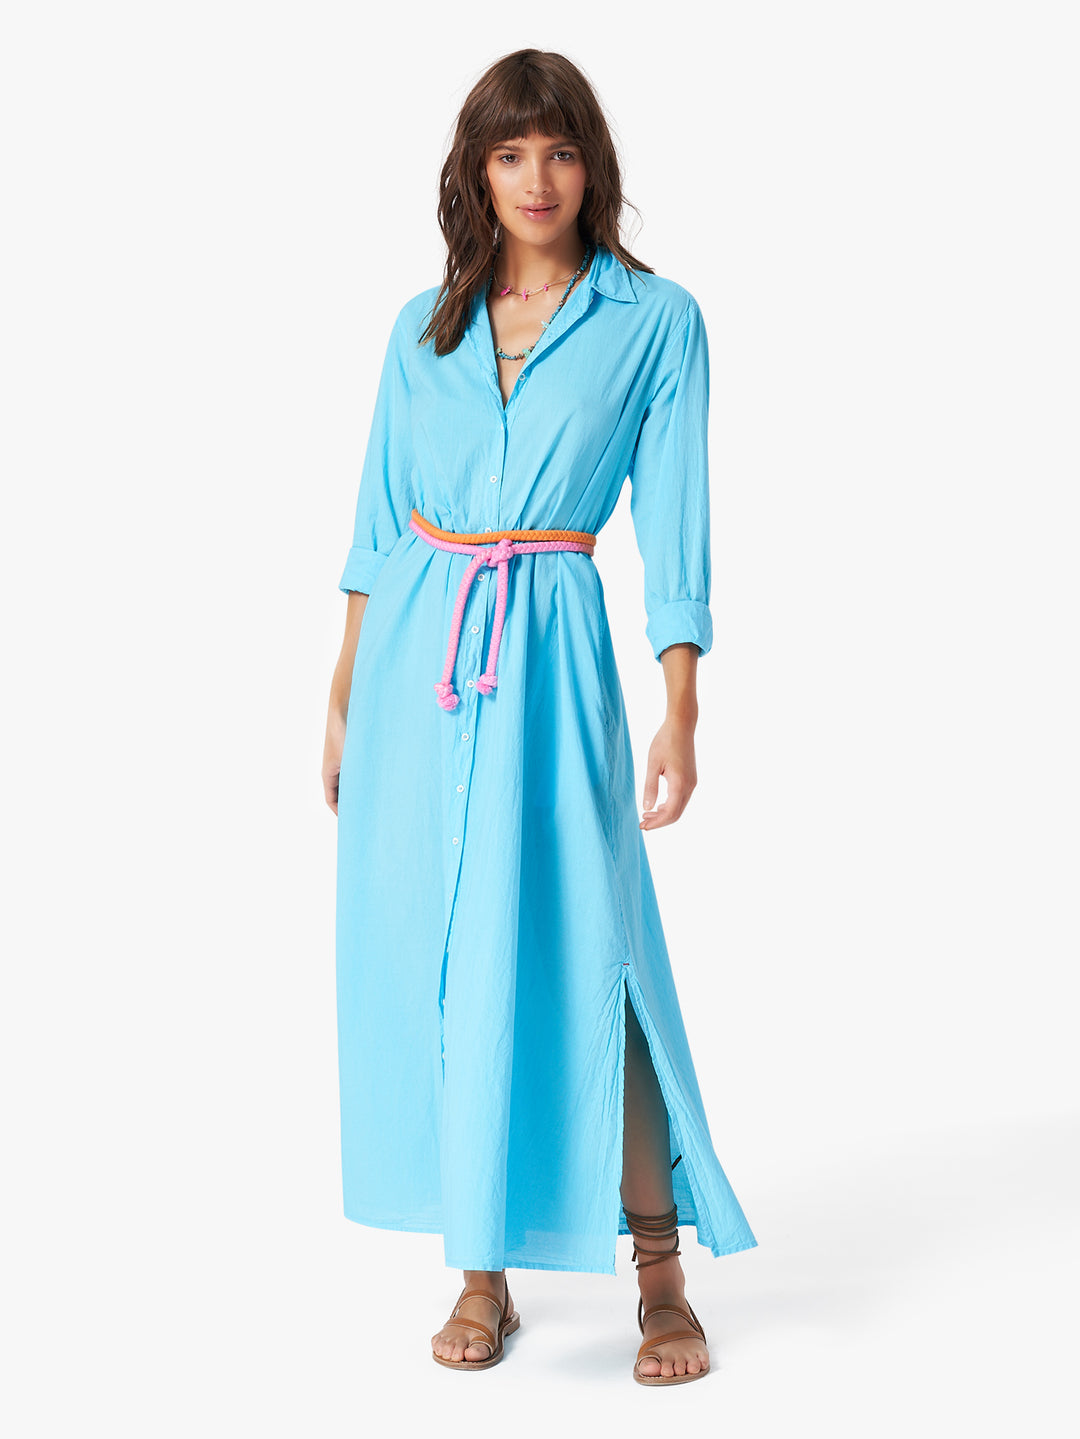 Xirena - Boden Dress in Turquoise